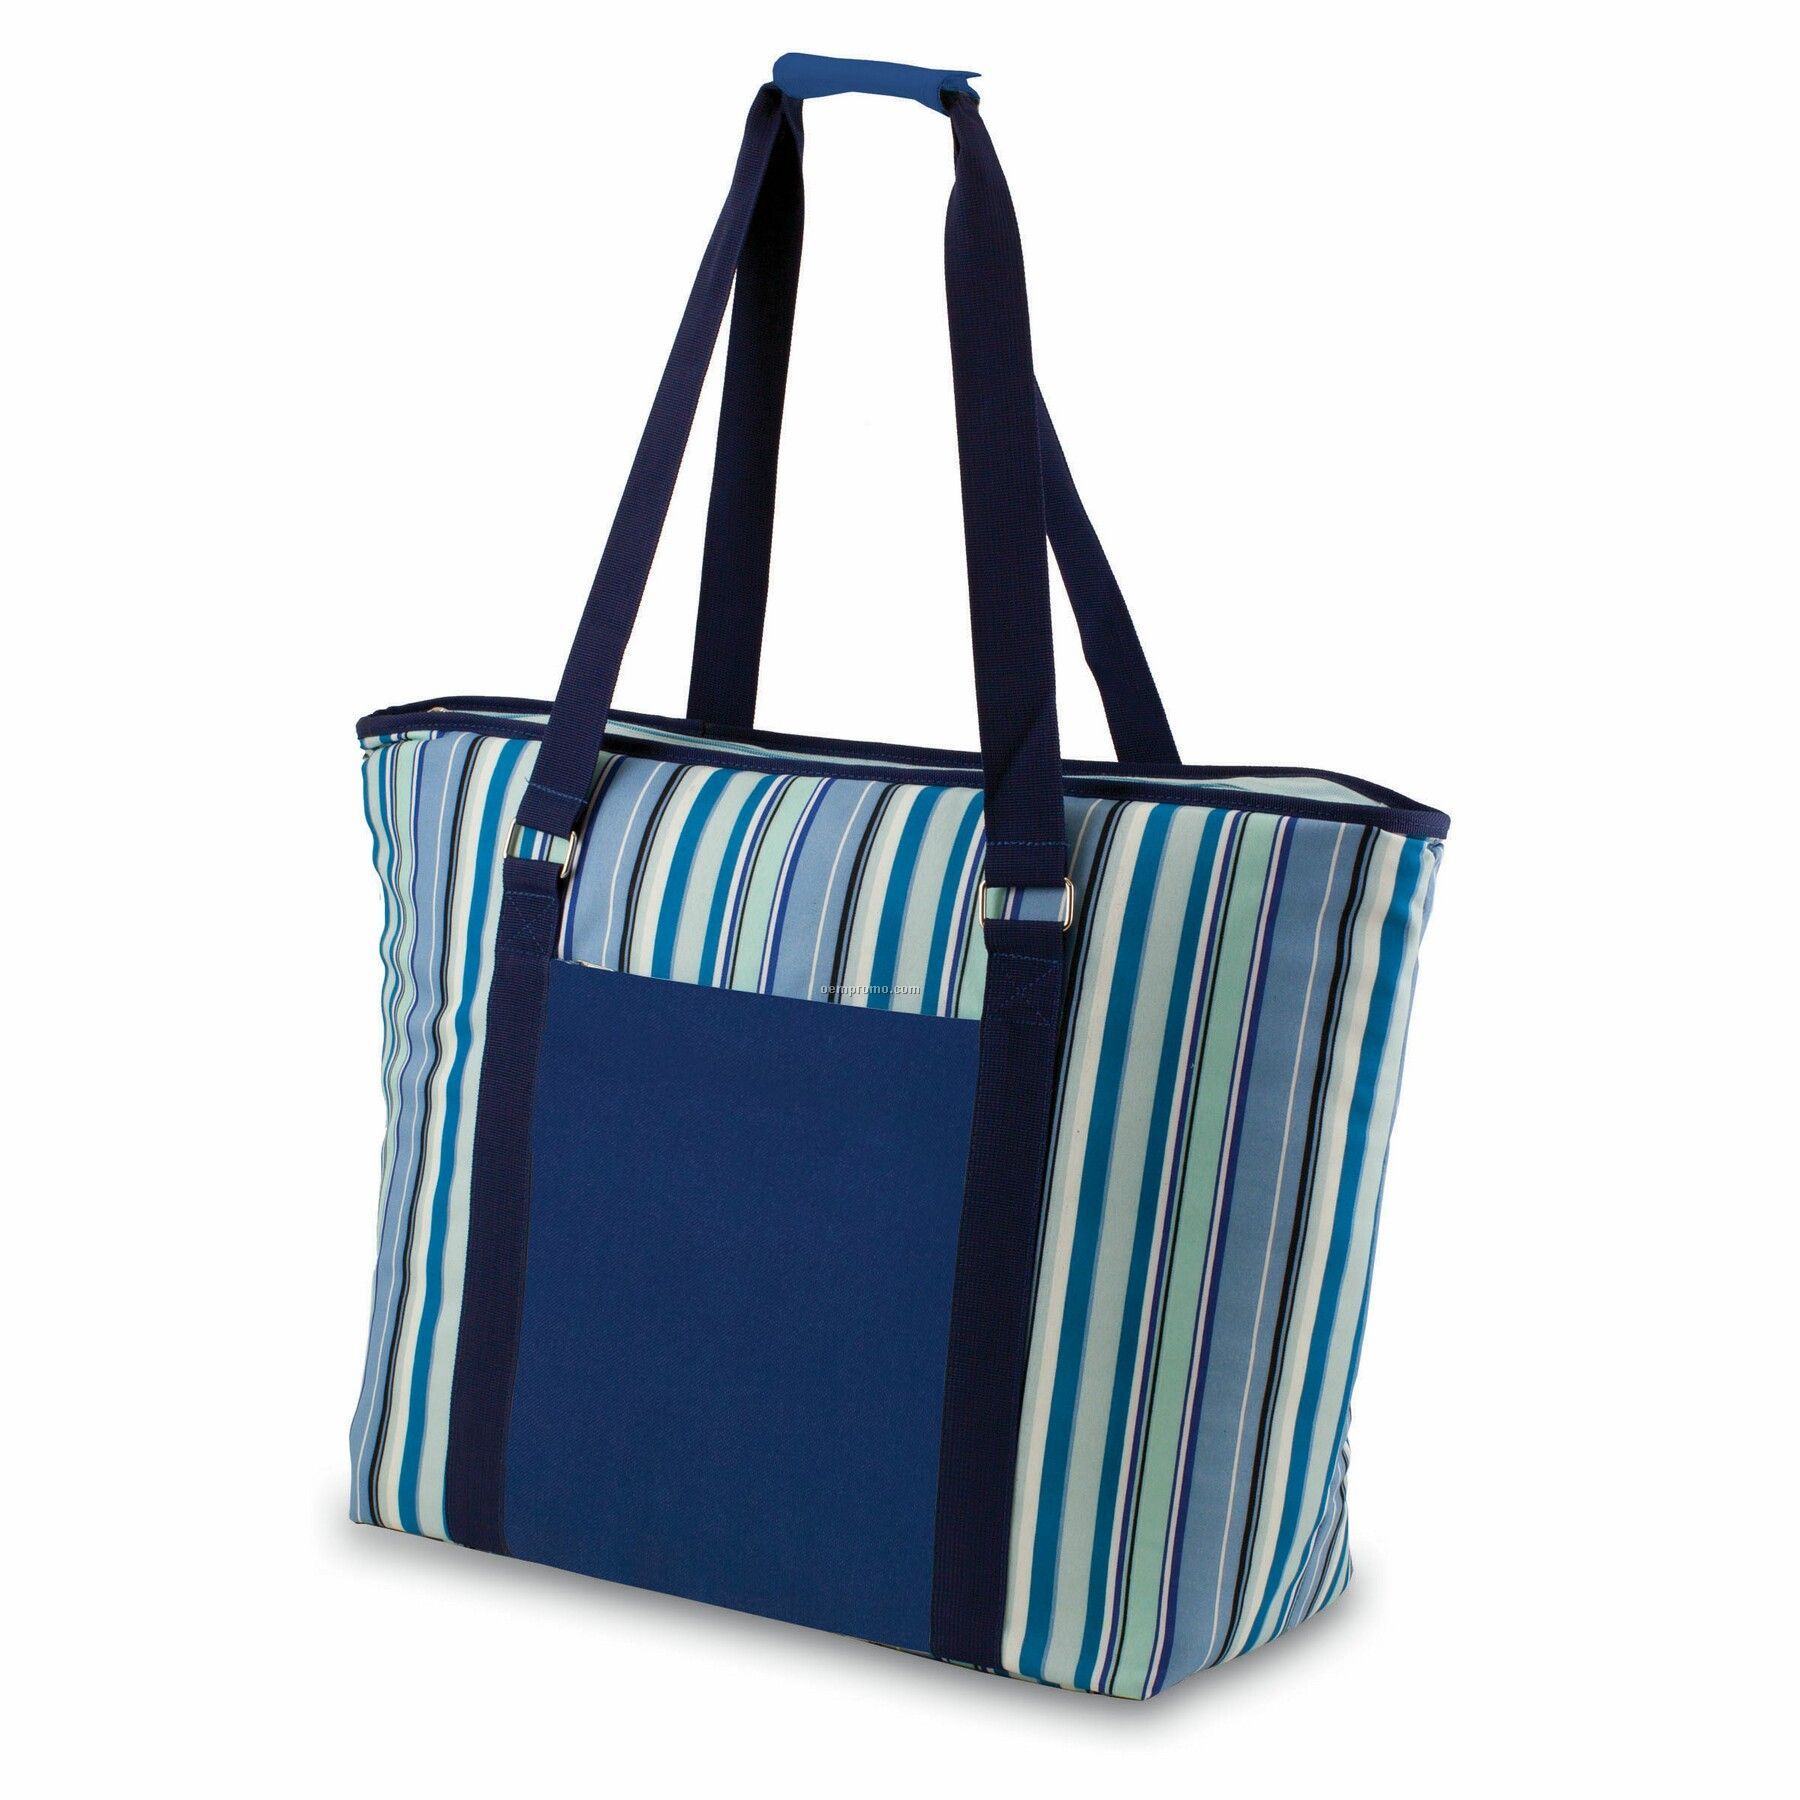 Tahoe Canvas Cooler Tote Bag W/ Pocket - Striped (48 Can Capacity)